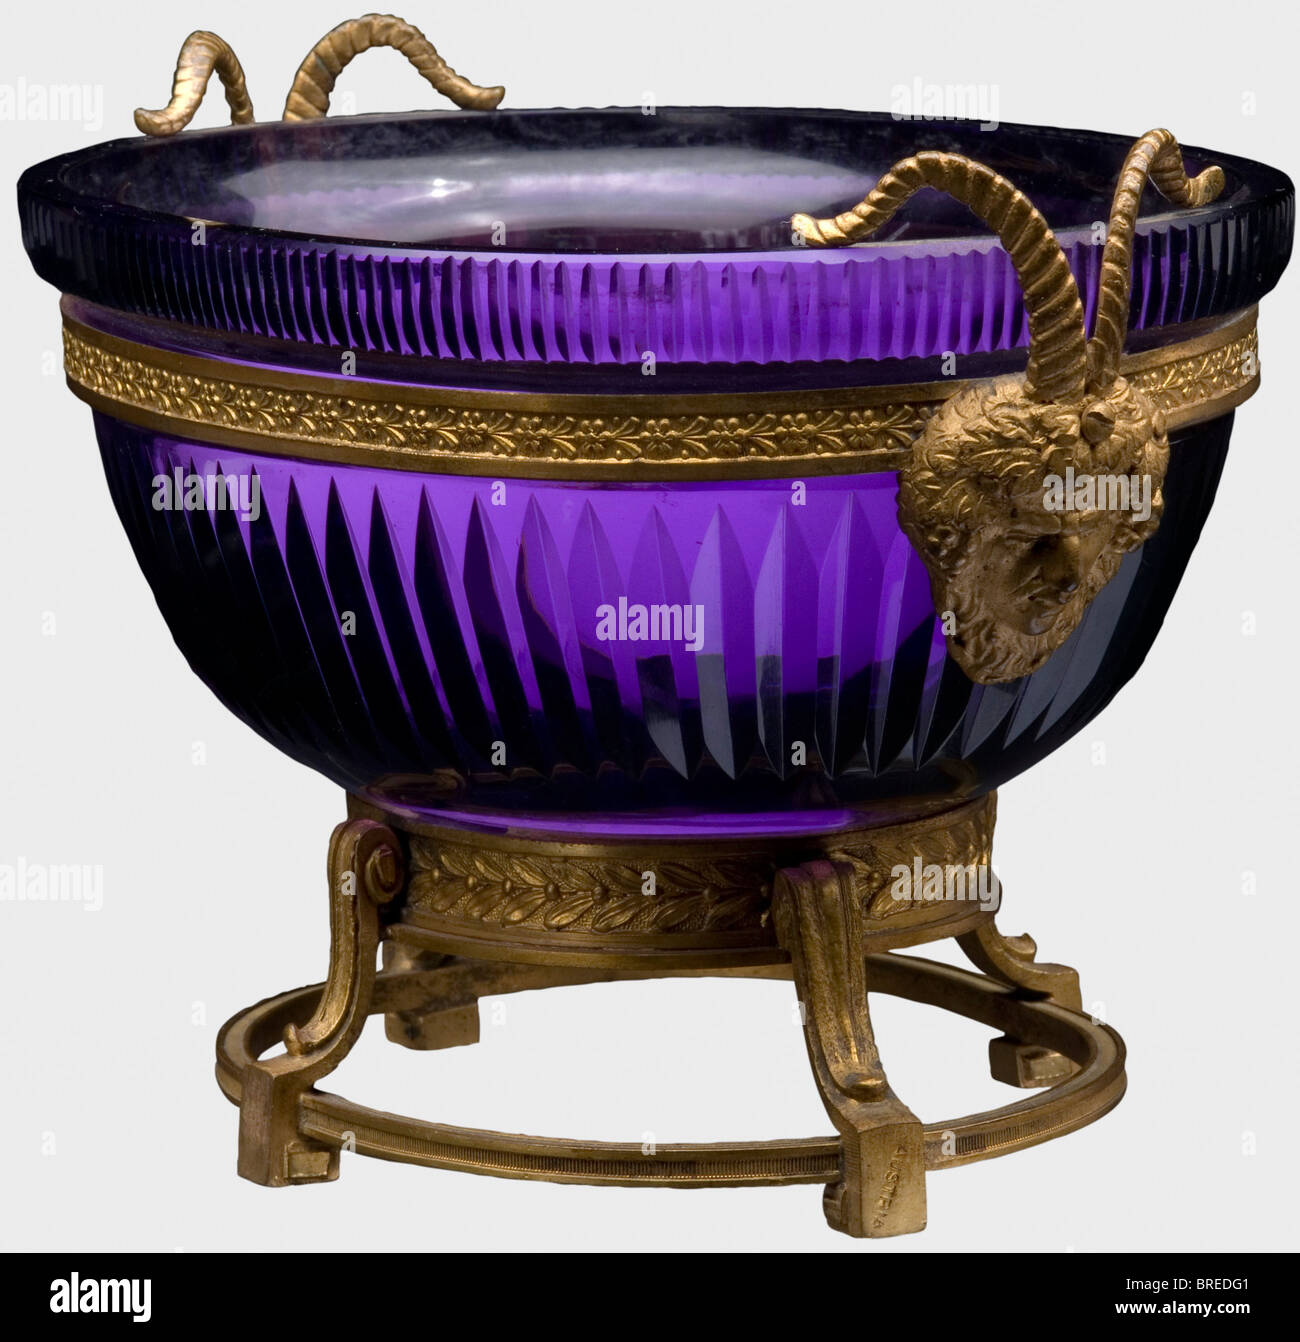 An Austrian confectionery dish, end of the 19th century Crystal glass flashed in violet. Fire-gilt bronze mountings with floral decoration, grotesque masks on the sides with rams horns. One foot is stamped 'Austria'. Dimensions ca. 12.5 x 19.5 x 13 cm. An inventory label 'H.V.v.W., G.v.R.' for Duchess Vera of Württemberg, Grand Duchess of Russia, on the bottom. Provenance: Grand Duchess Vera Konstantinovna Romanova (1854 - 1912). historic, historical, 19th century, vessel, vessels, object, objects, stills, clipping, clippings, cut out, cut-out, cut-outs, Stock Photo